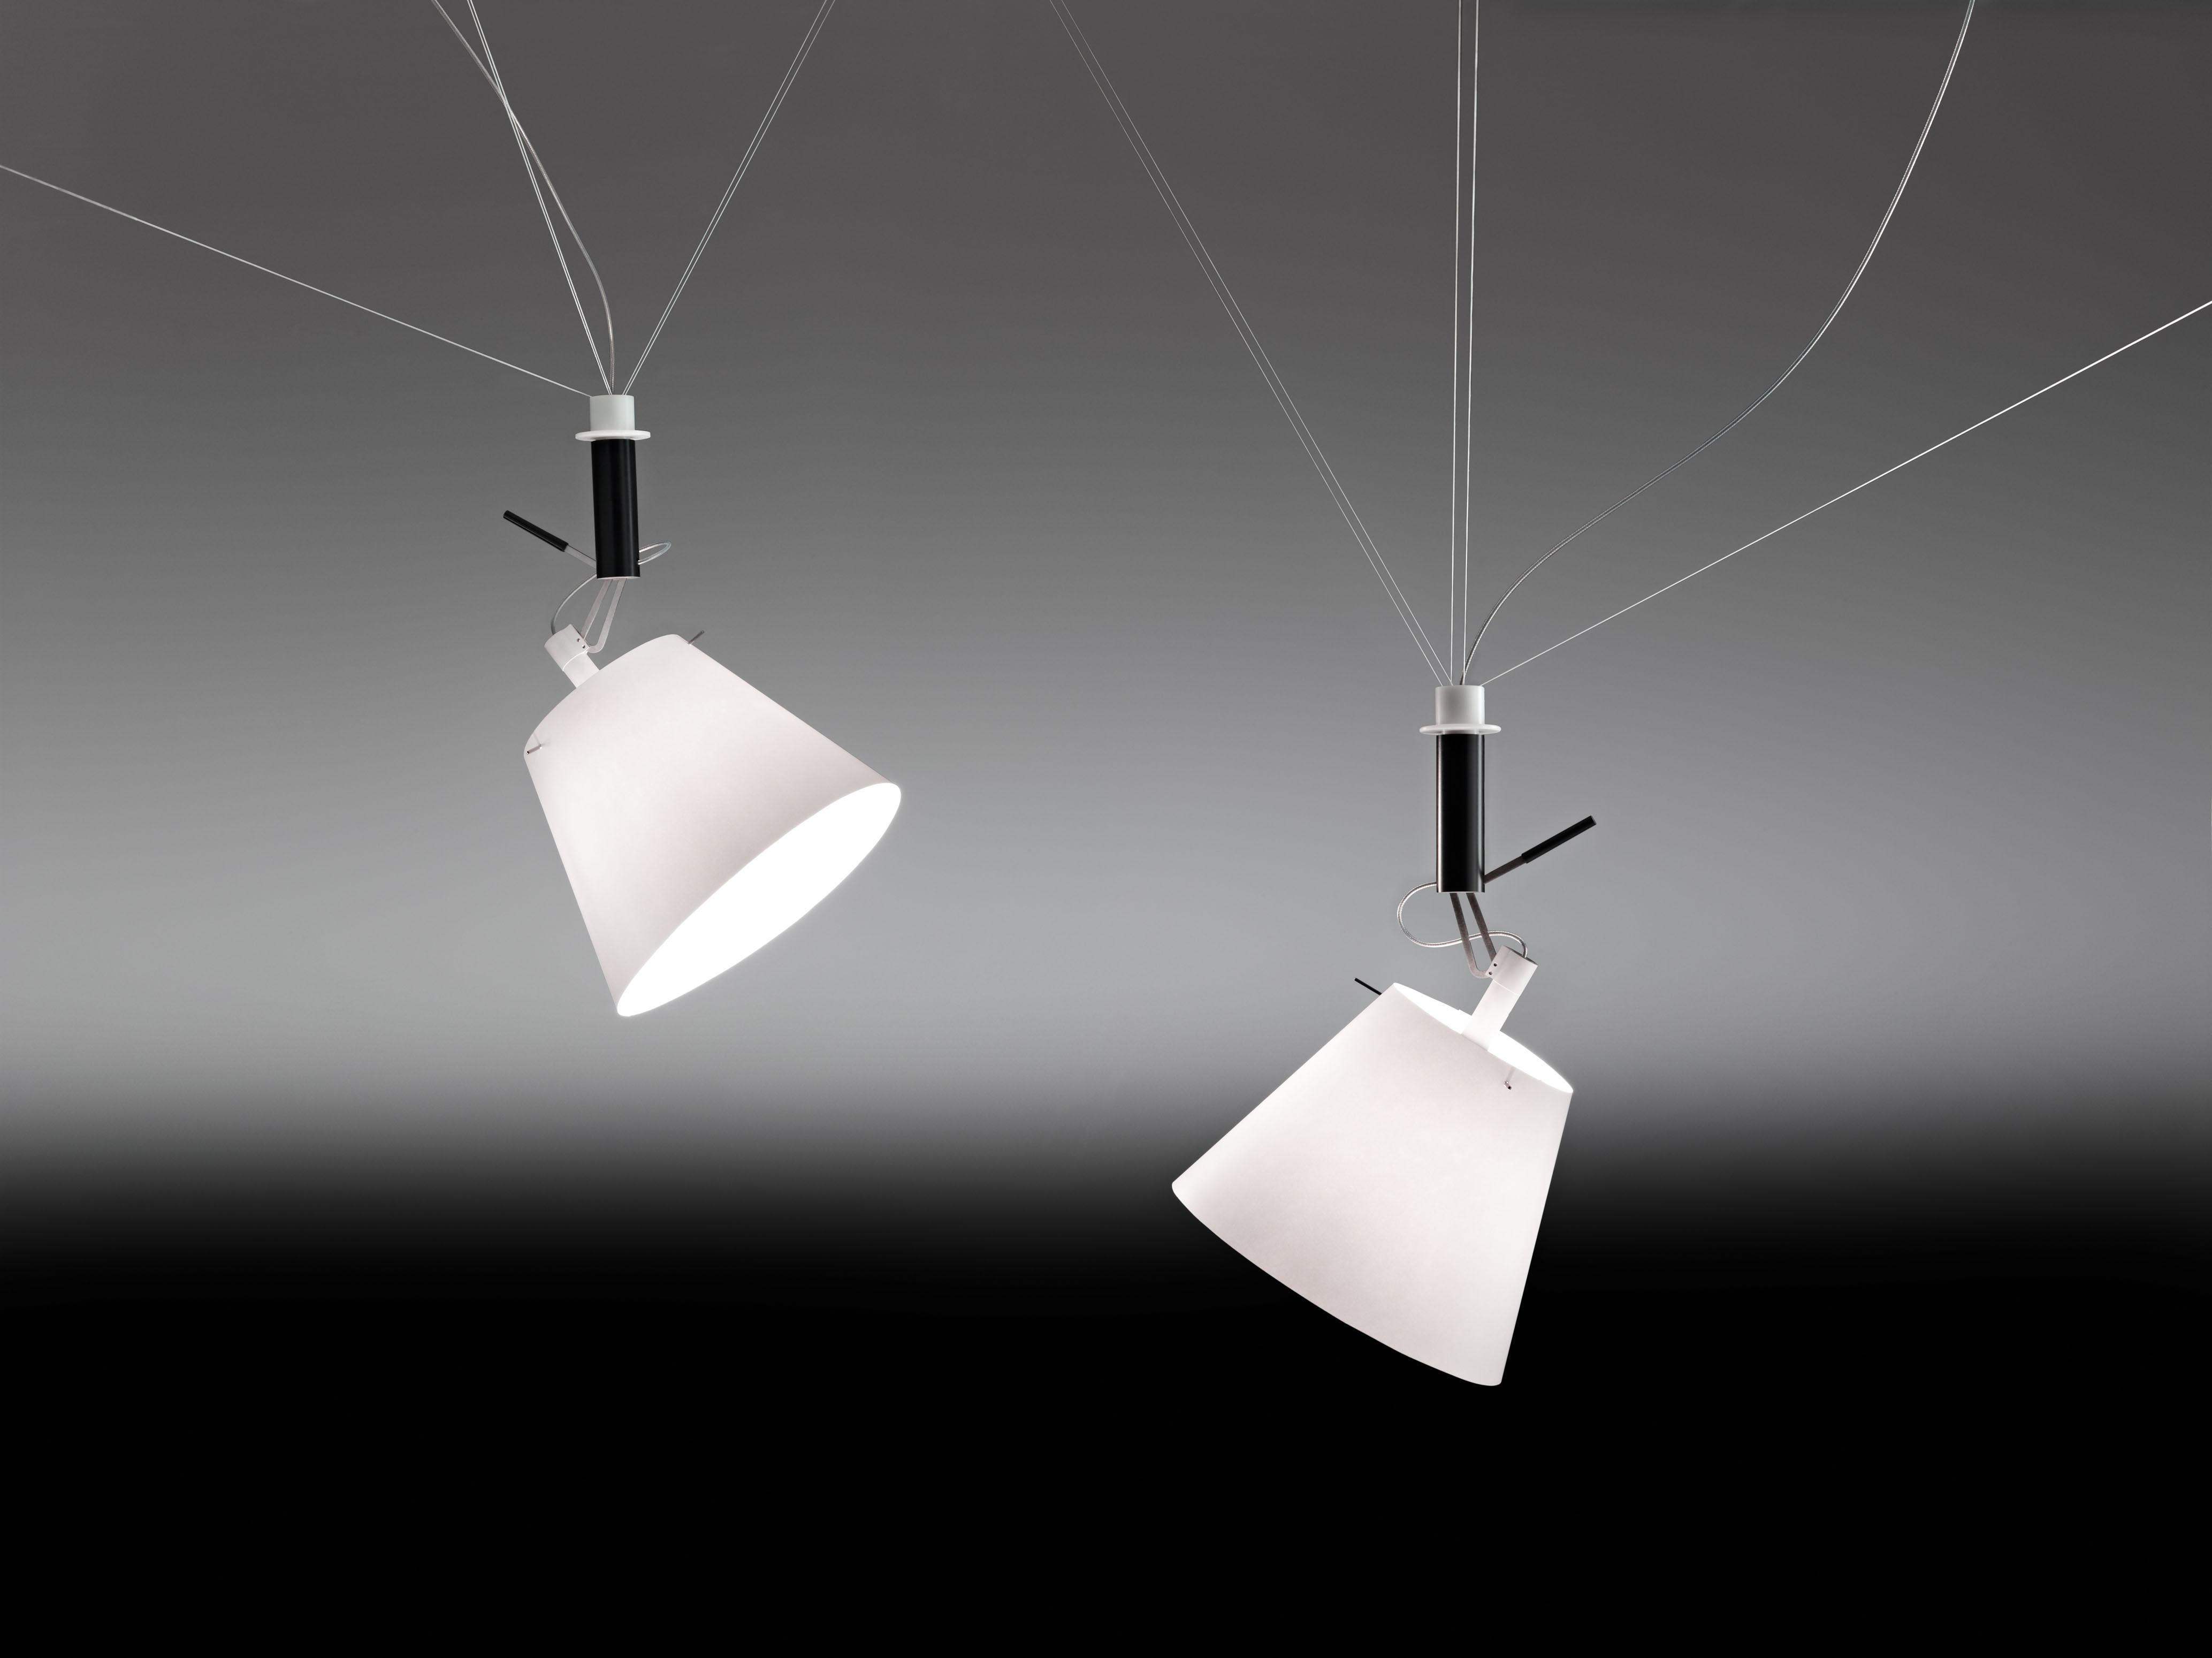 Da+Dort is a suspension fixture supported by 3 cables that can be mounted at any position to create a unique installation with endless possibilities for getting light into hard to reach places. 

Da+Dort is is made from paper, stainless steel,